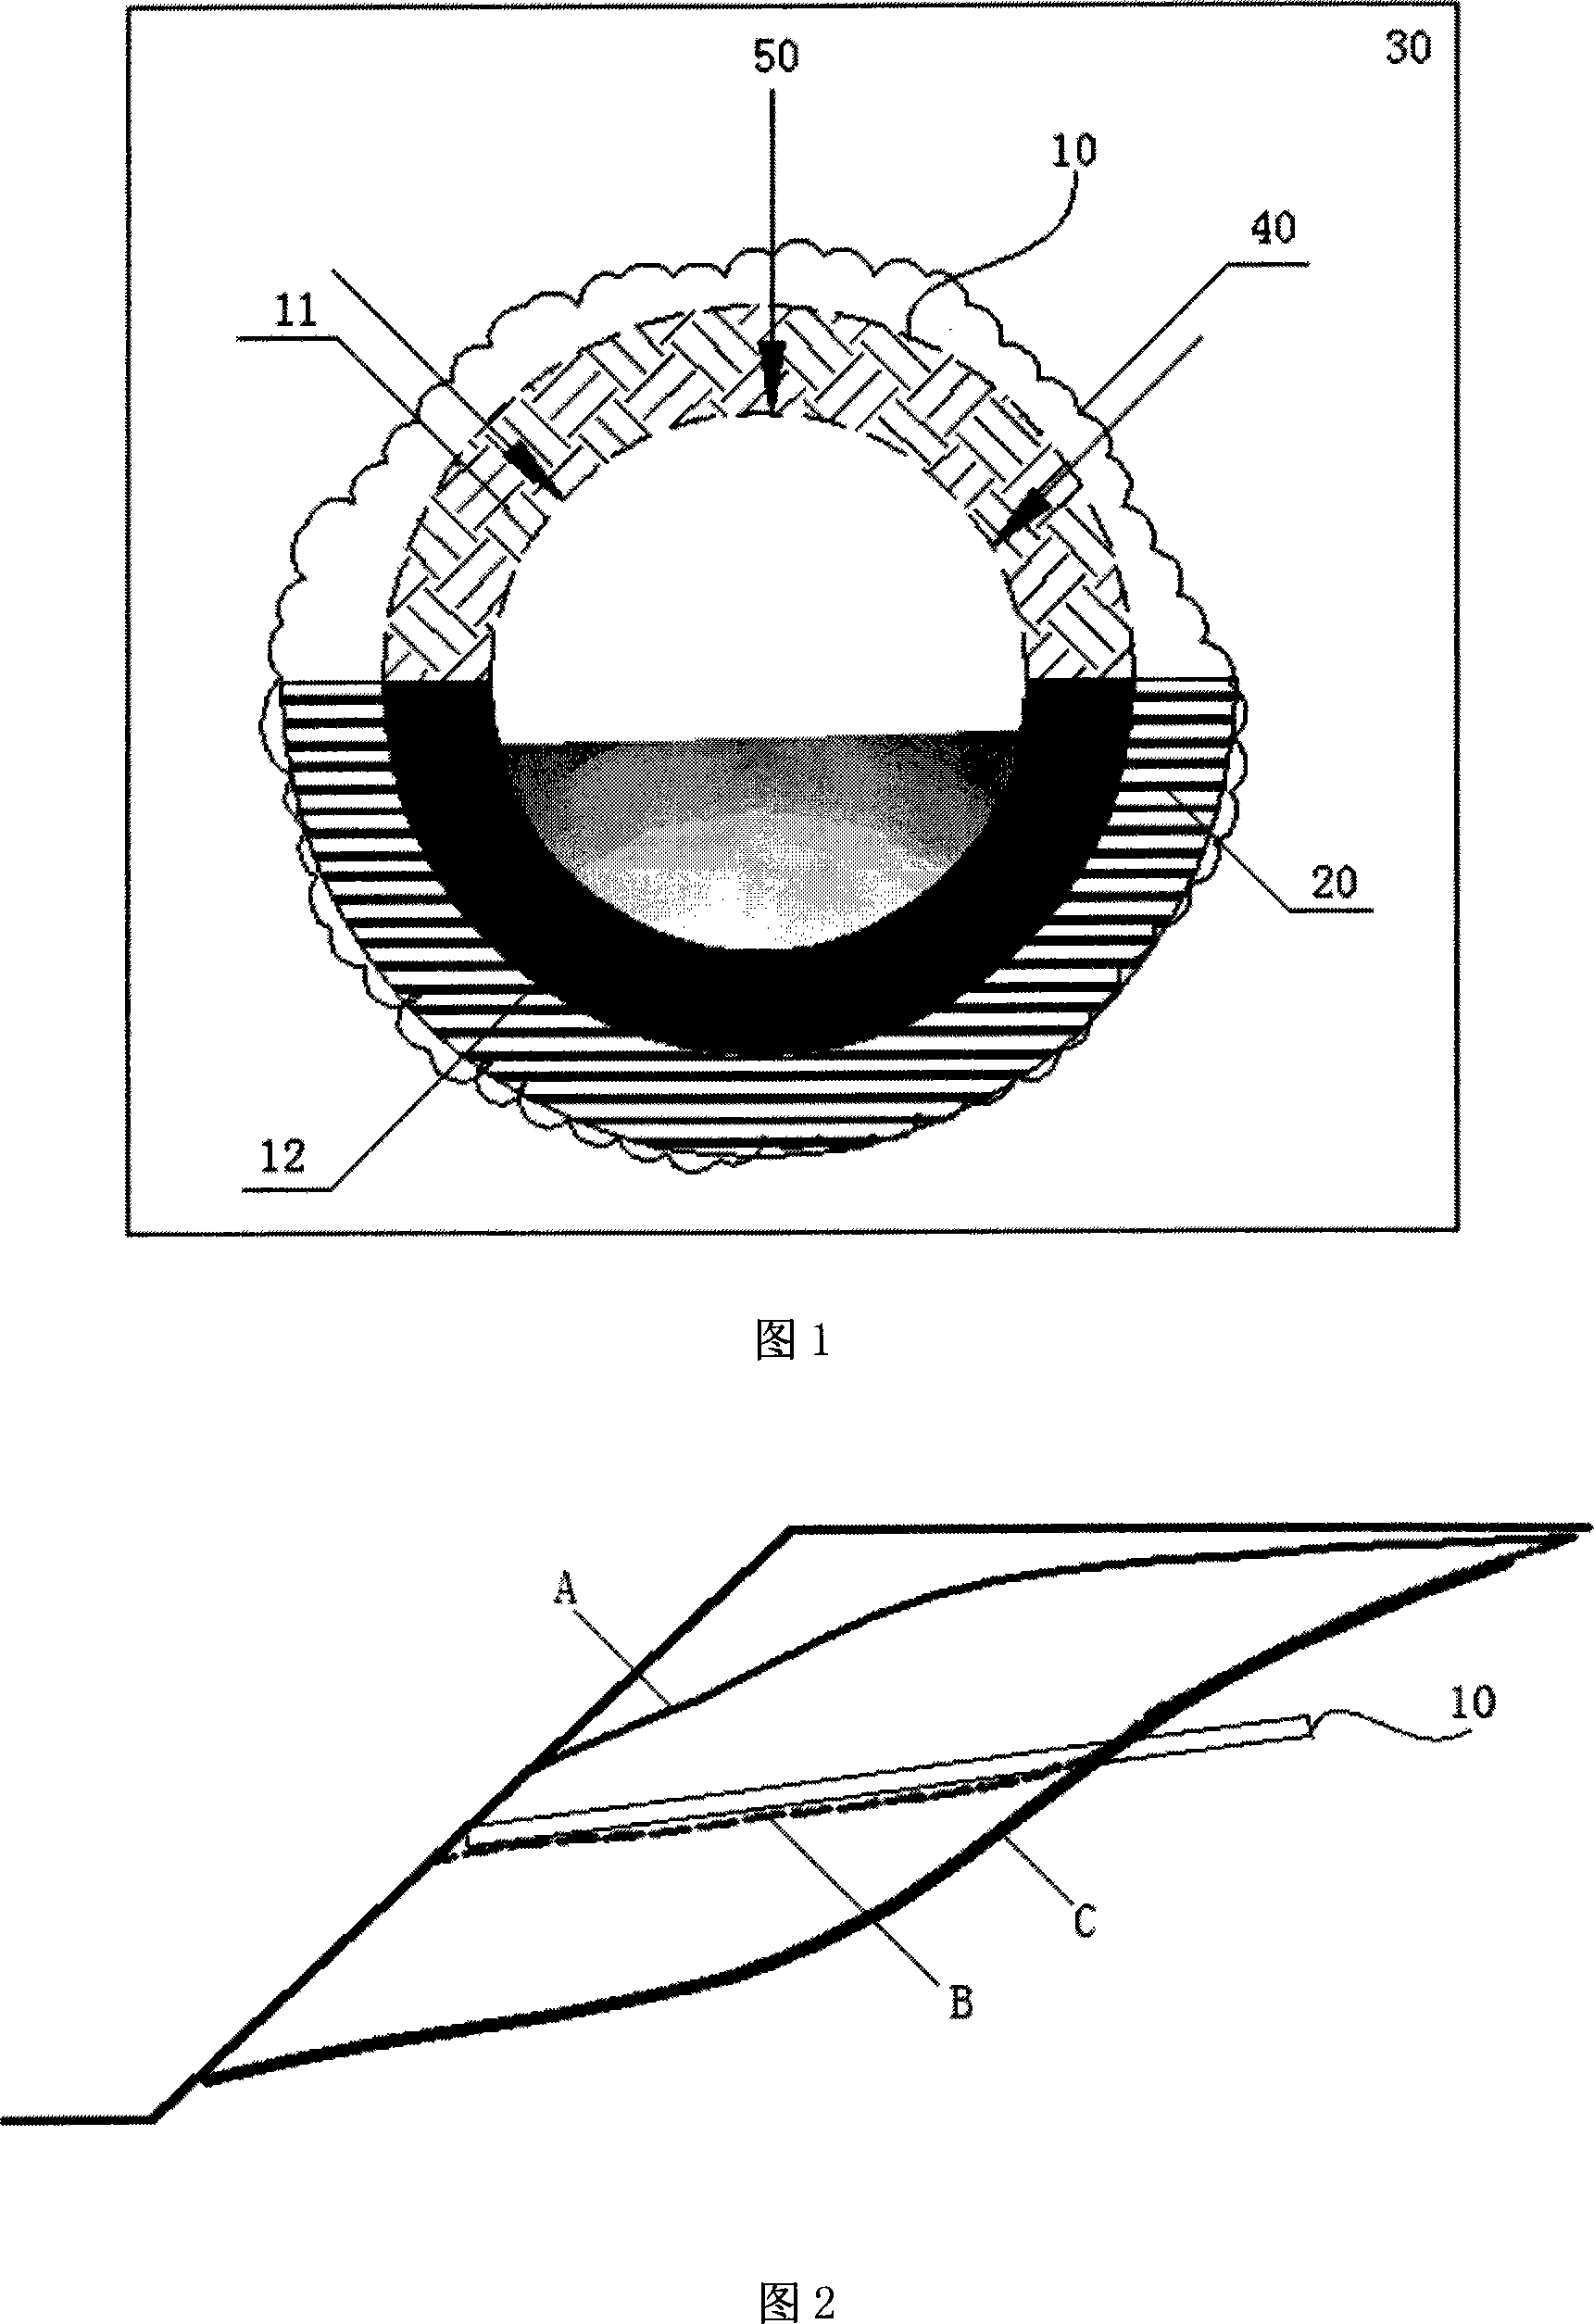 Semi-permeable discharge pipe and its discharging net